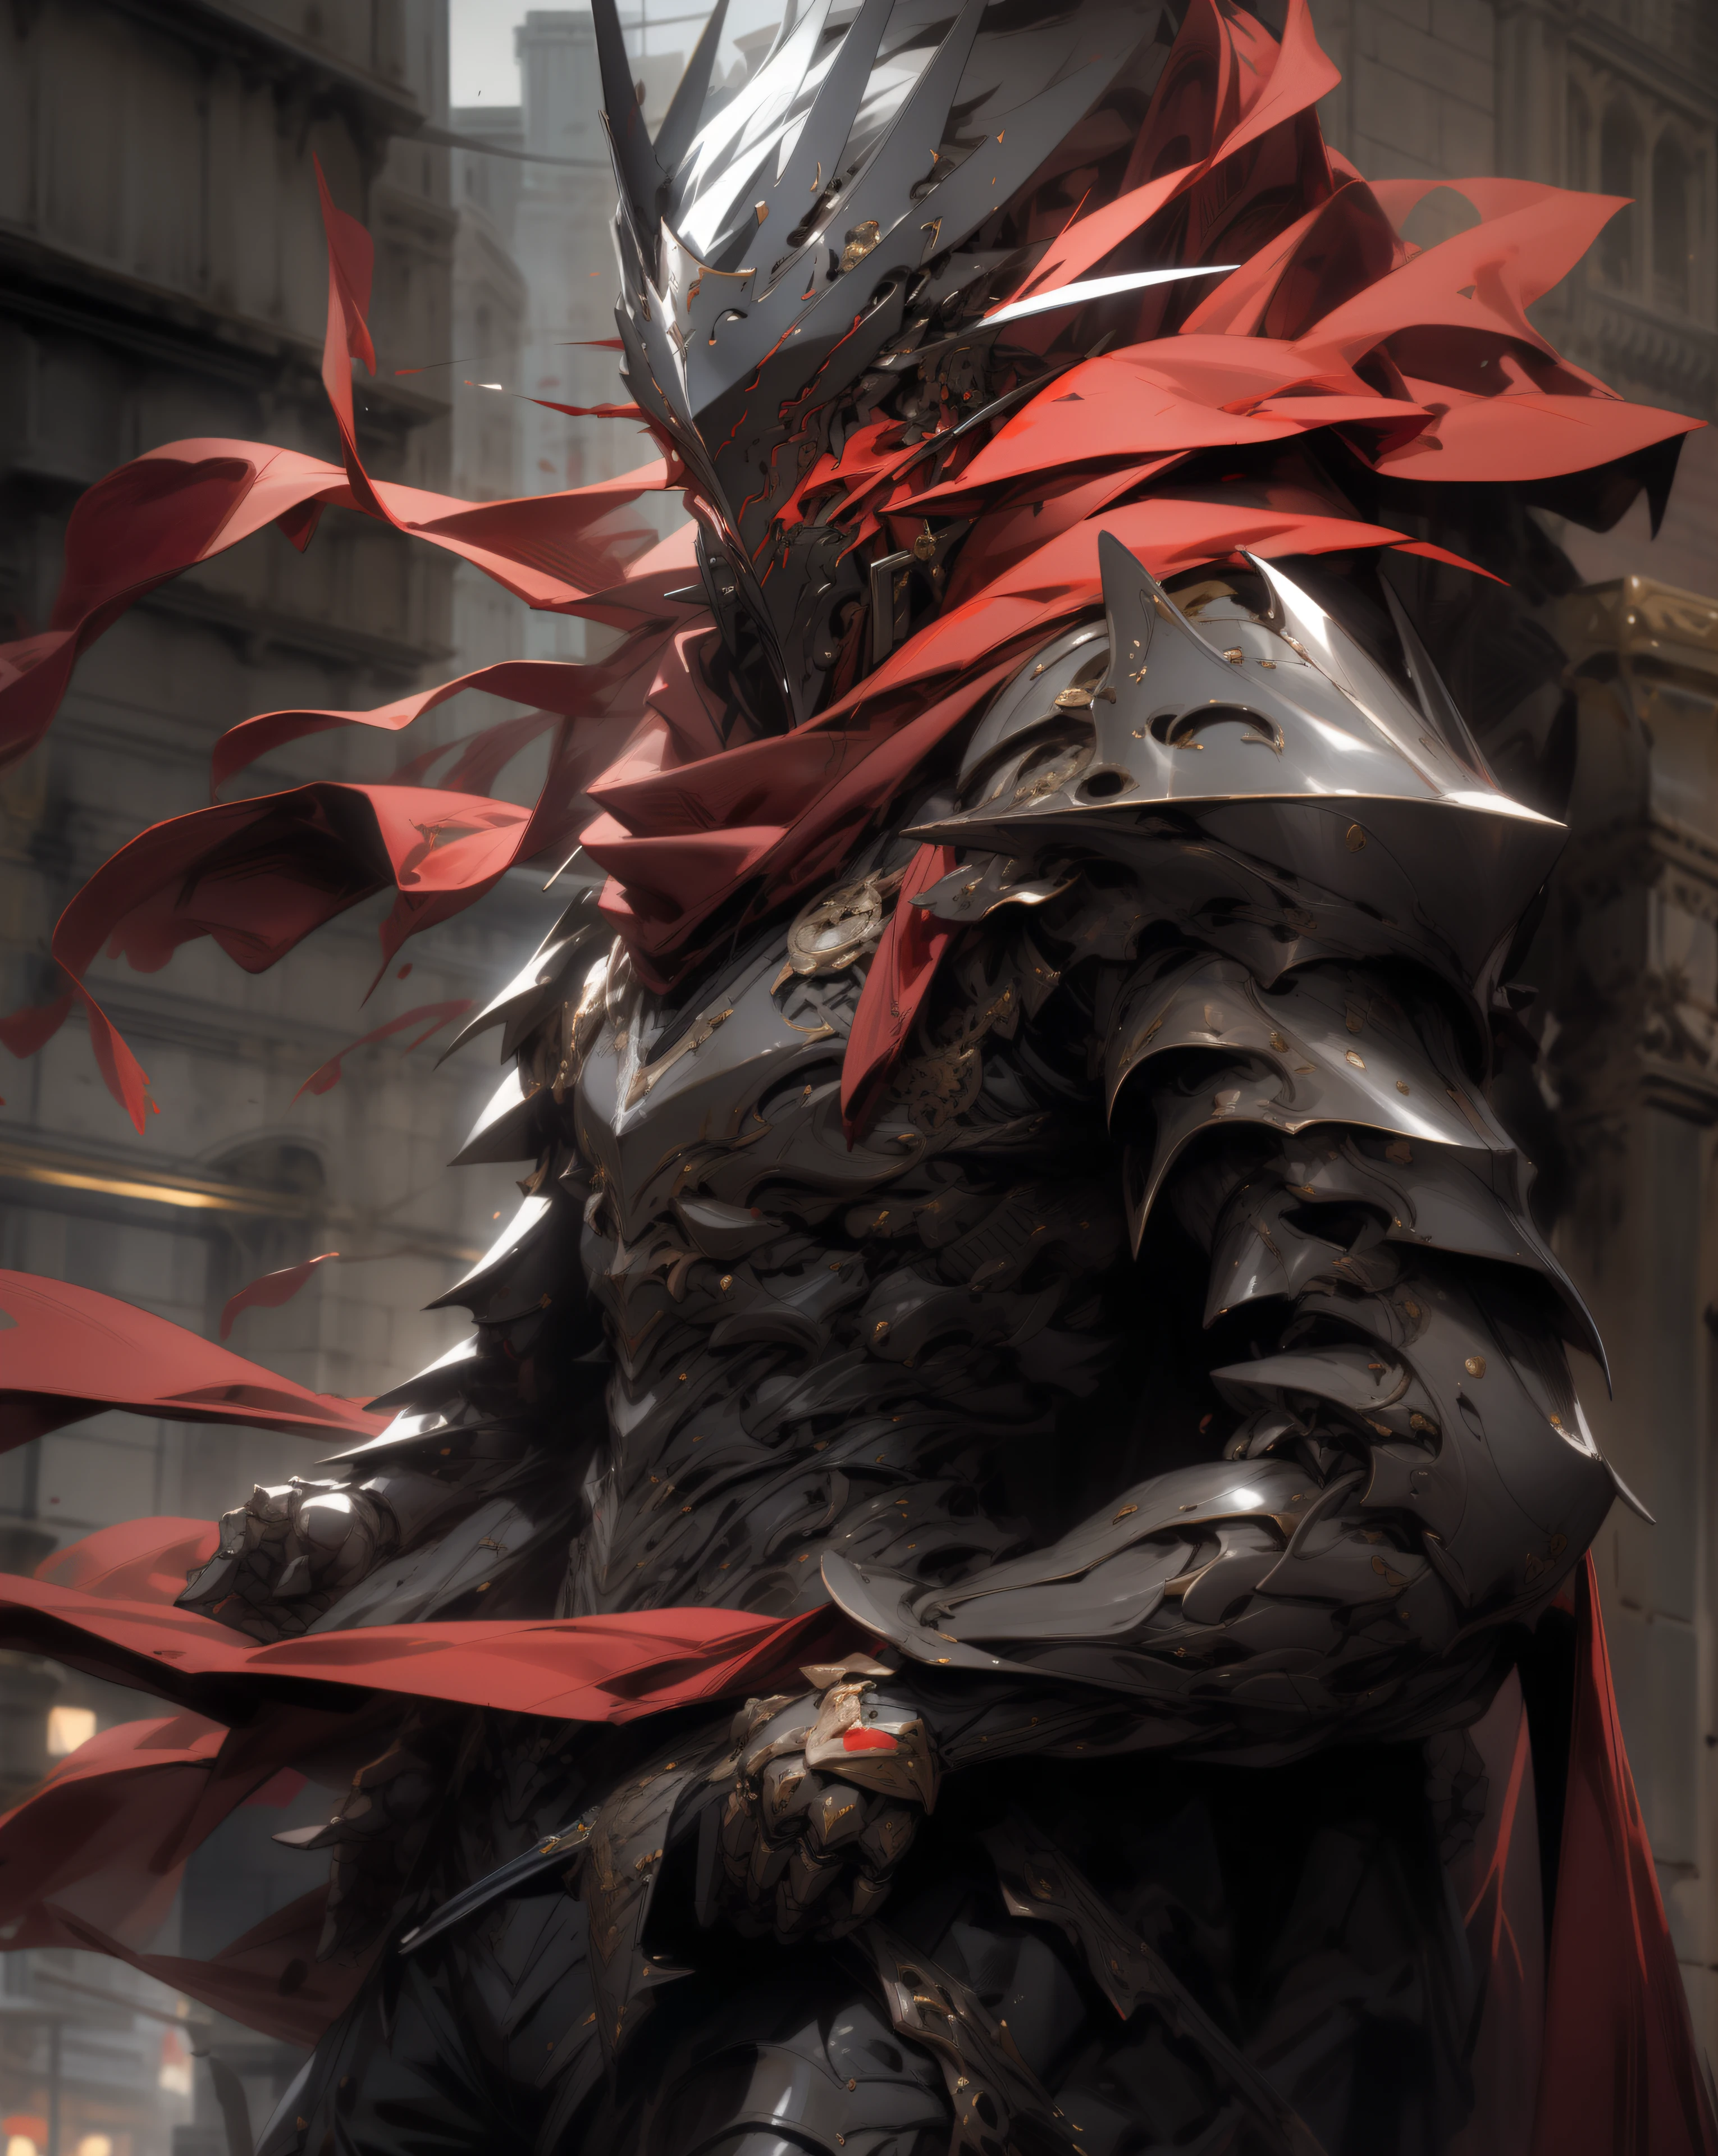 arafed knight with a sword and a red cape in a city, style of raymond swanland, ares with heavy armor and sword, inspired by Raymond Swanland, black and red armor, gothic knight, knight armored in red, blood knight, unreal engine fantasy art, anthropomorphic raven knight, in style of james paick, (solo), (one boy)